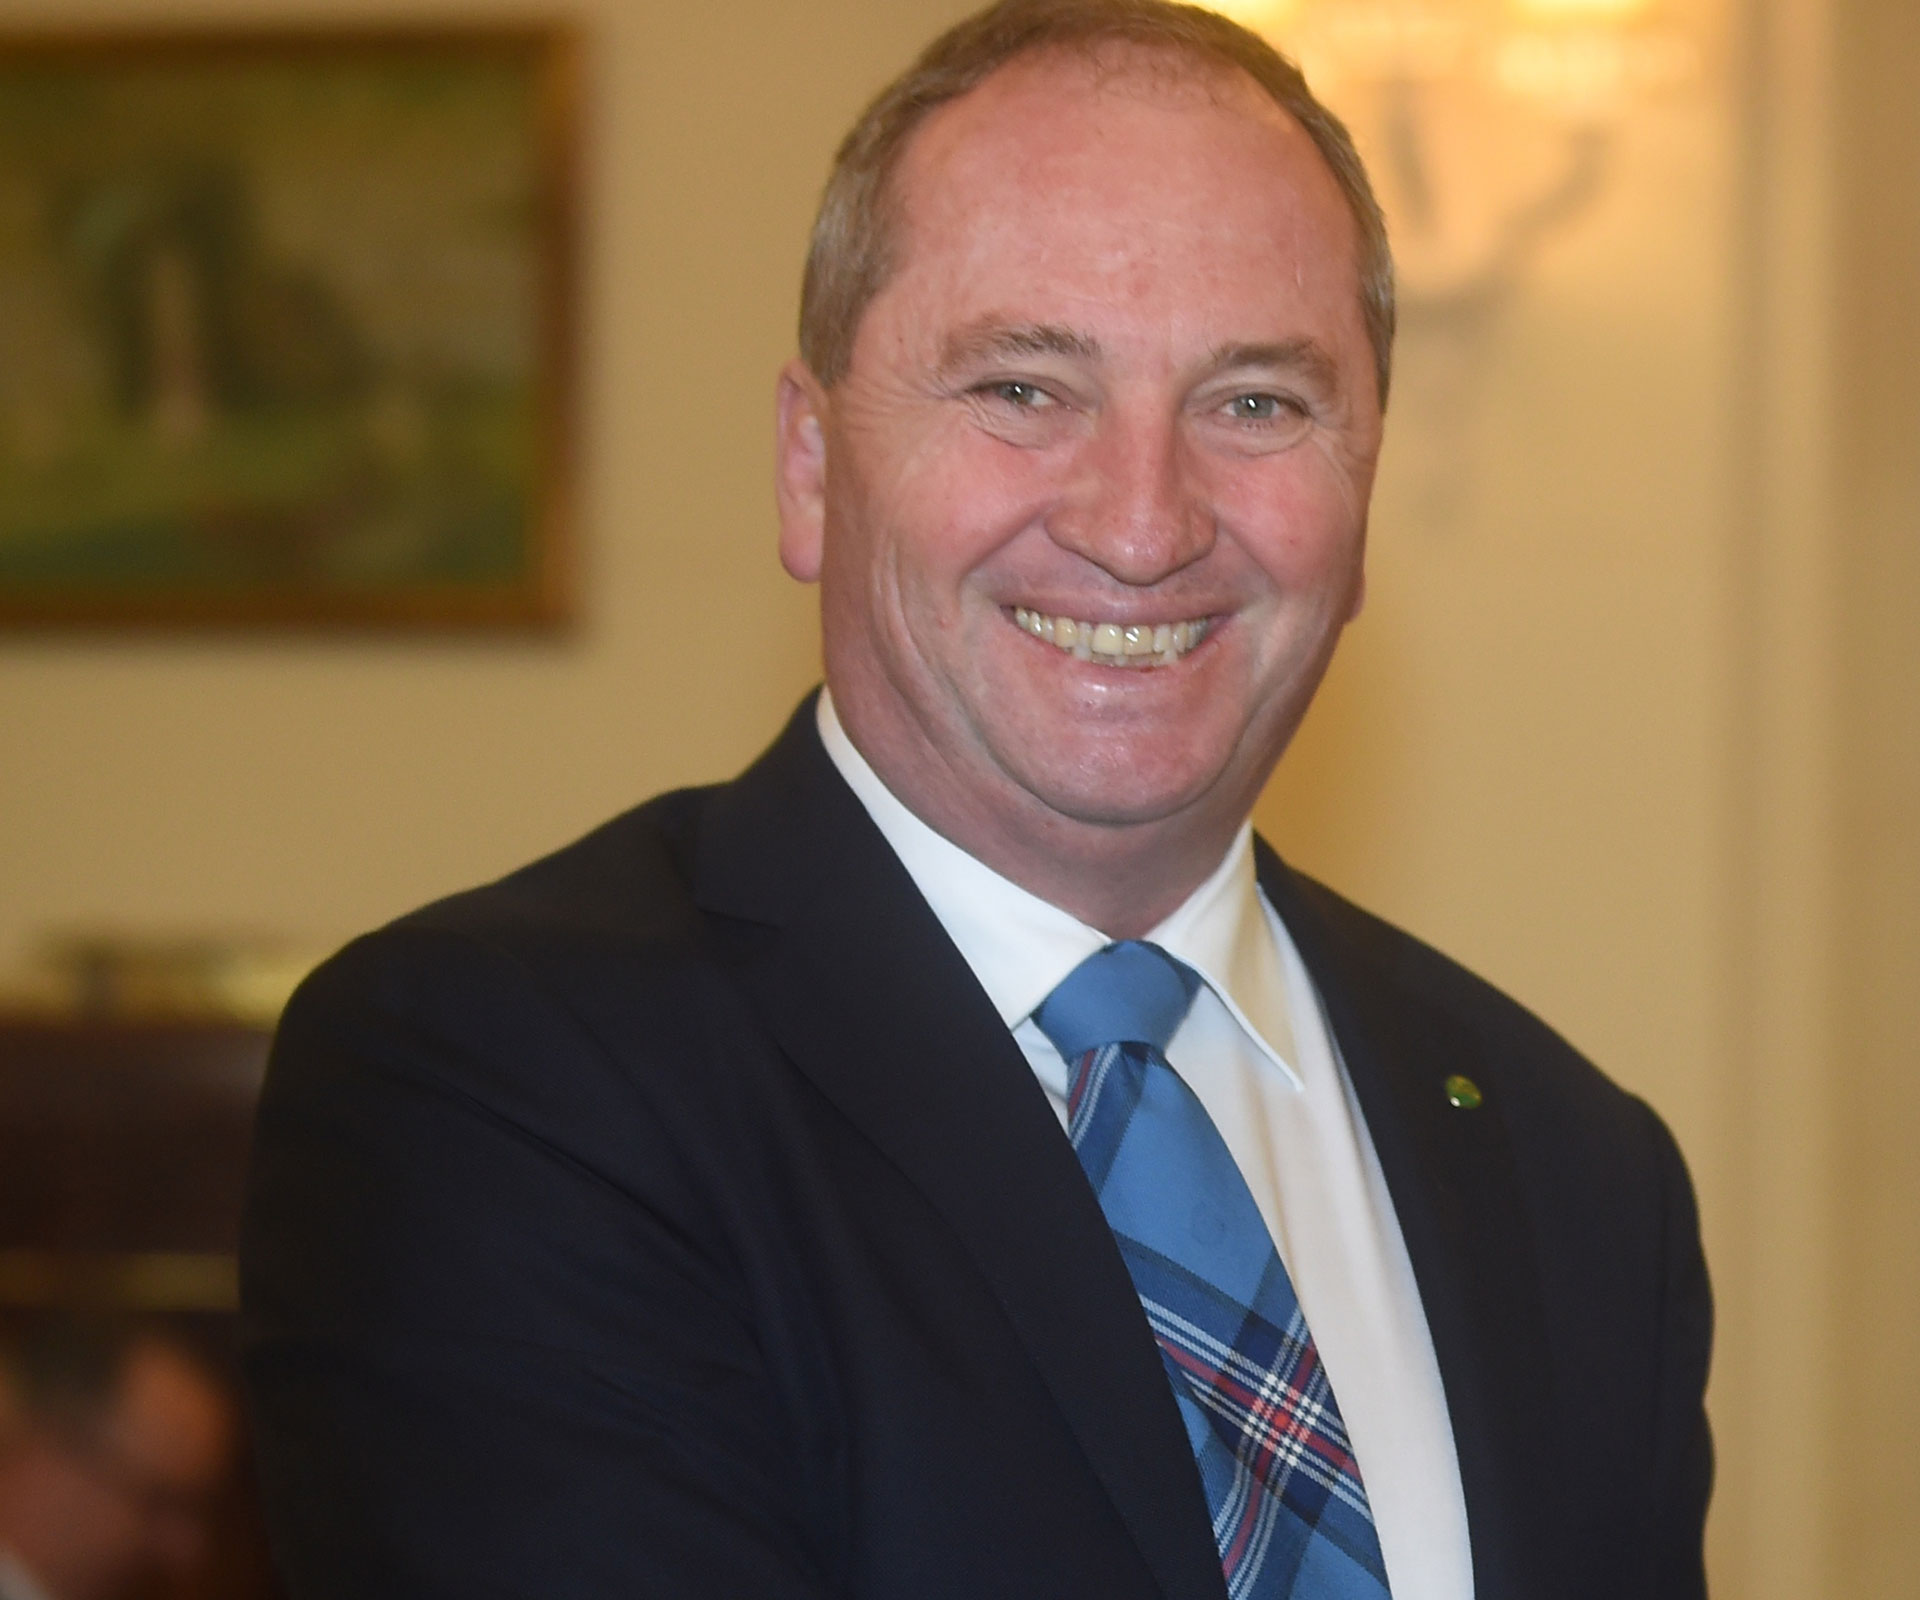 Deputy PM Barnaby Joyce says Australia should build new (taxpayer funded) coal-fired power stations